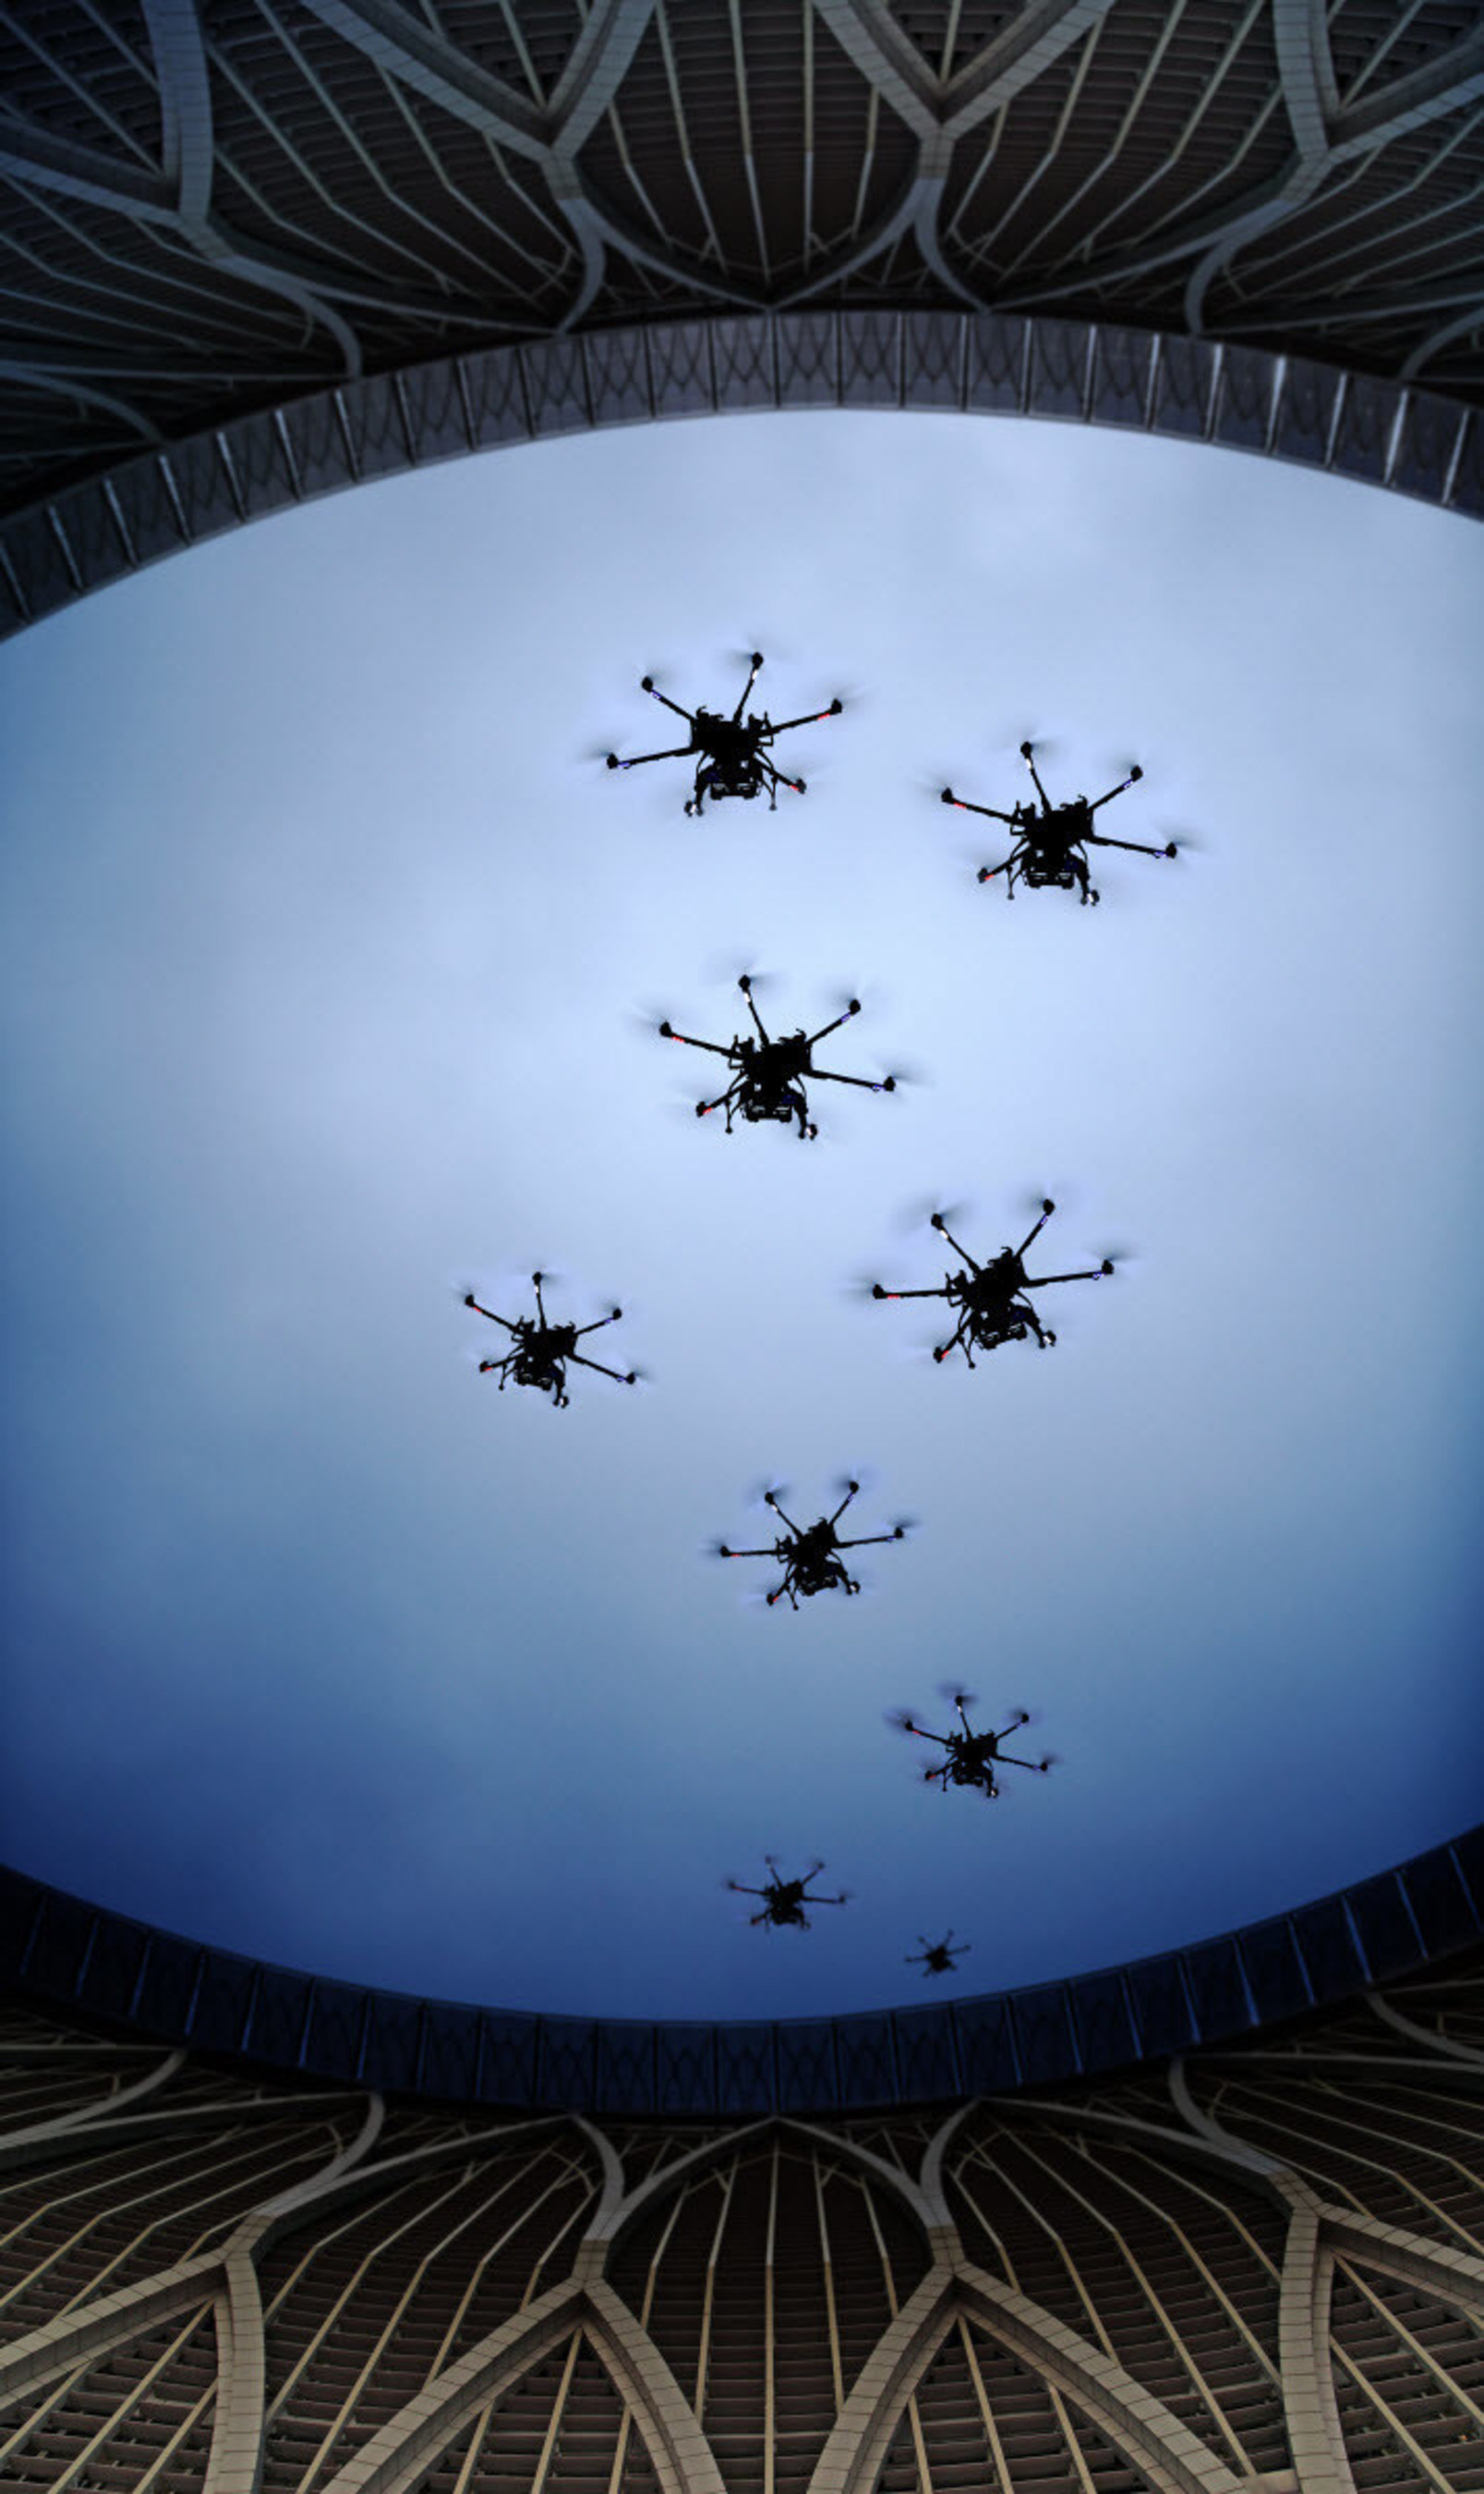 Drones: They Have Cameras, They Can Fly, And They Are Looking At You